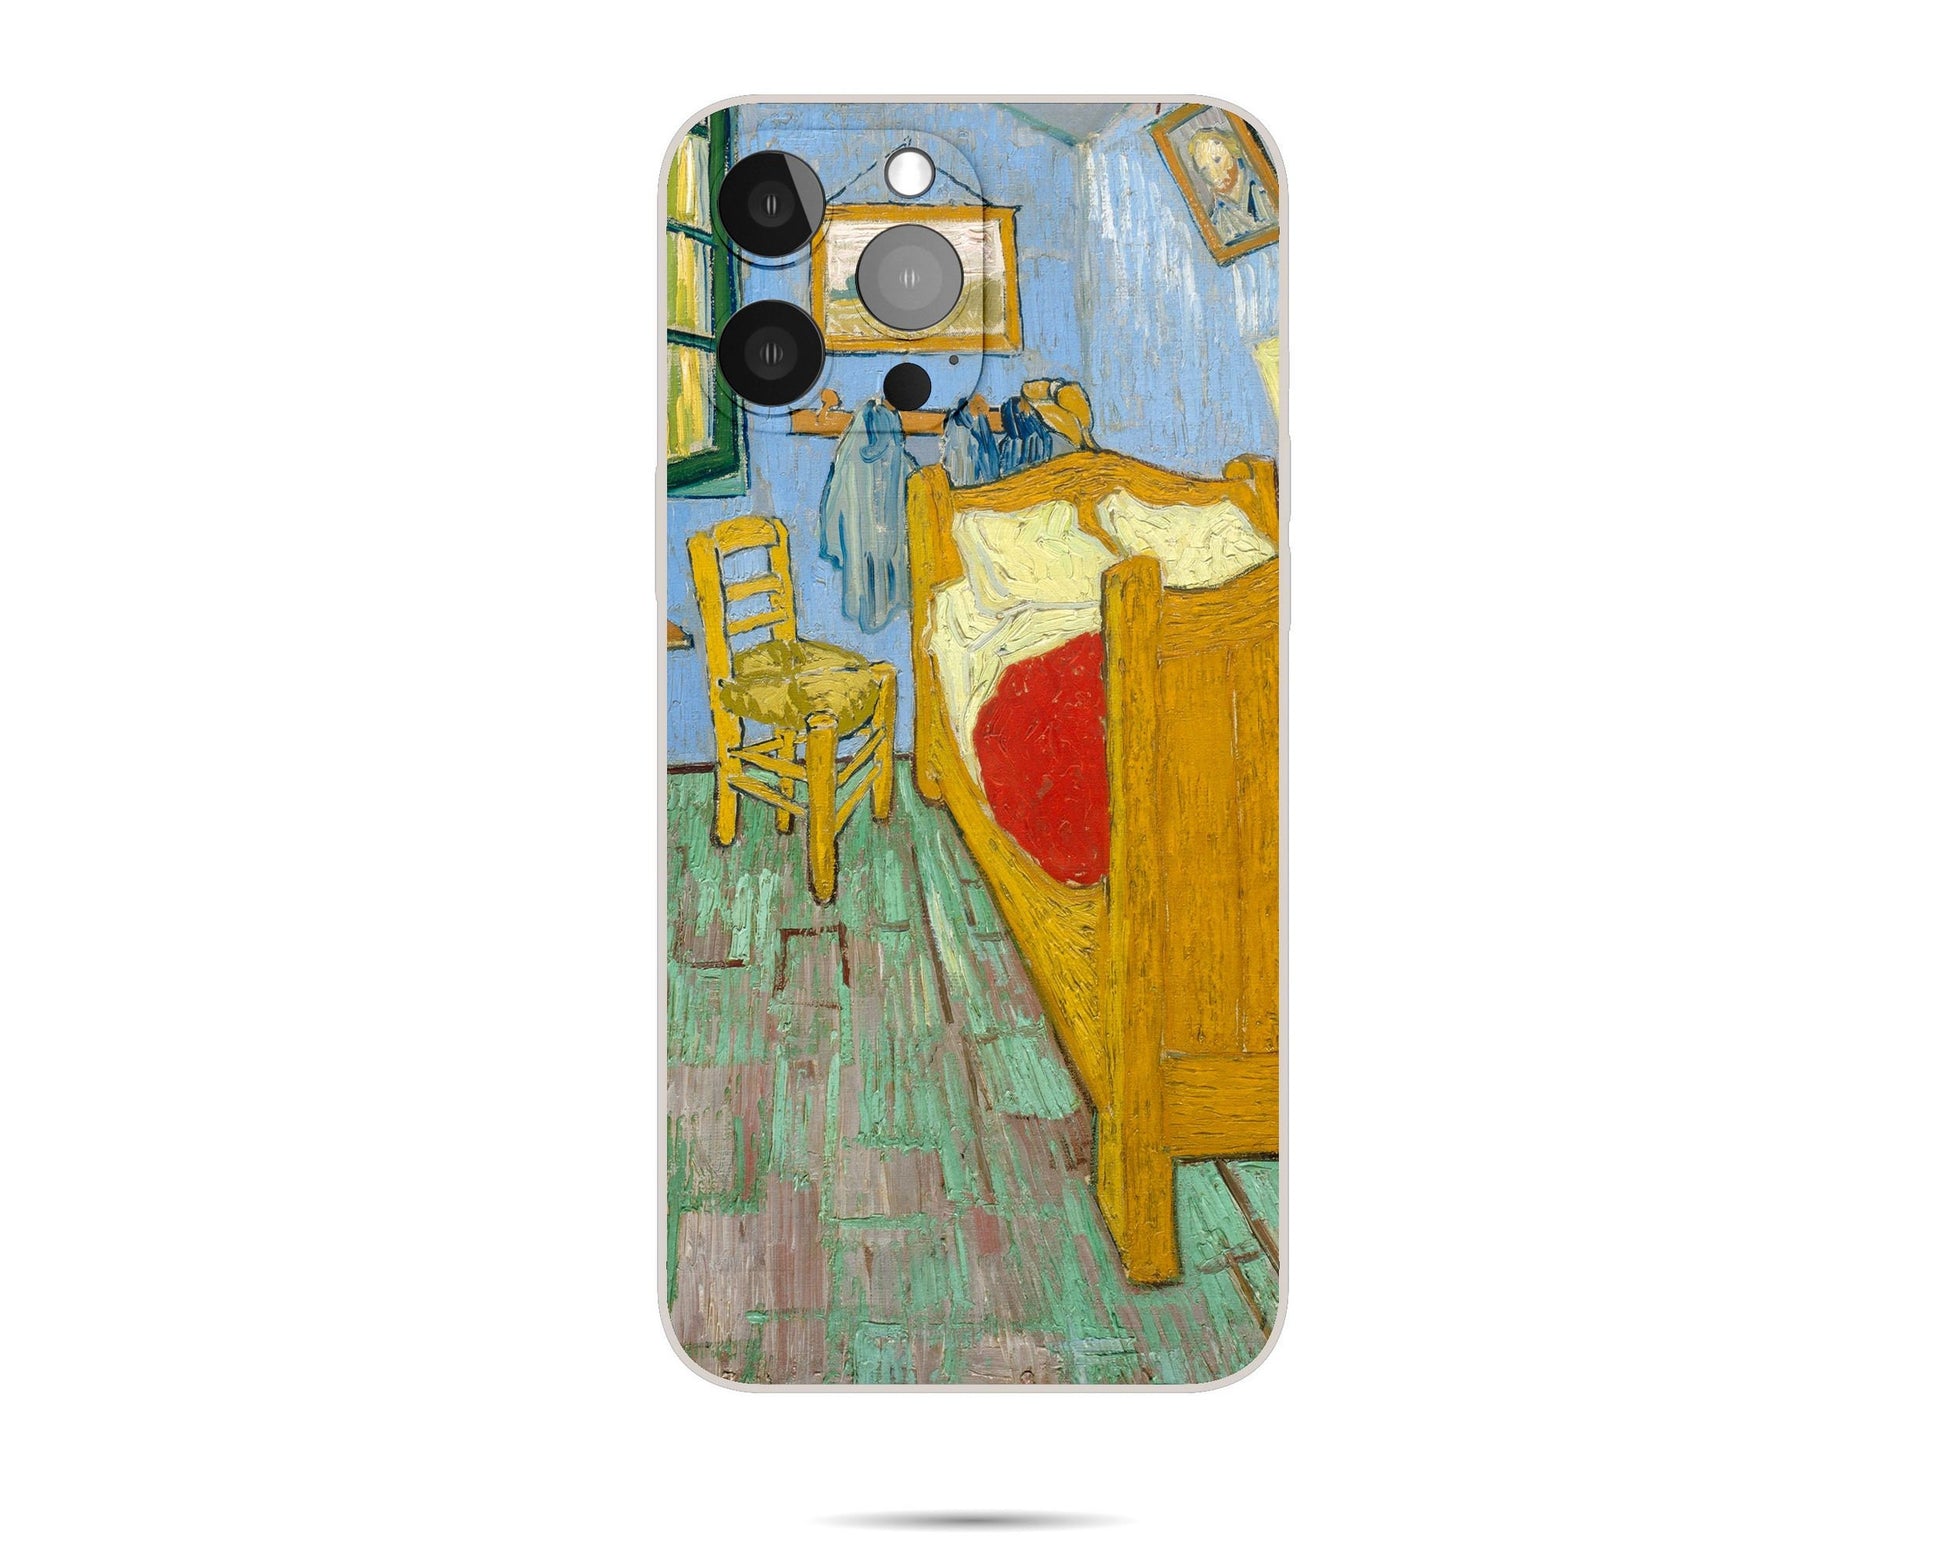 Vincent Van Gogh The Bedroom Iphone Cover, Iphone 11, Iphone 7, Iphone 8 Plus Case Art, Vivid Colors, Aesthetic Phone Case, Gift For Her